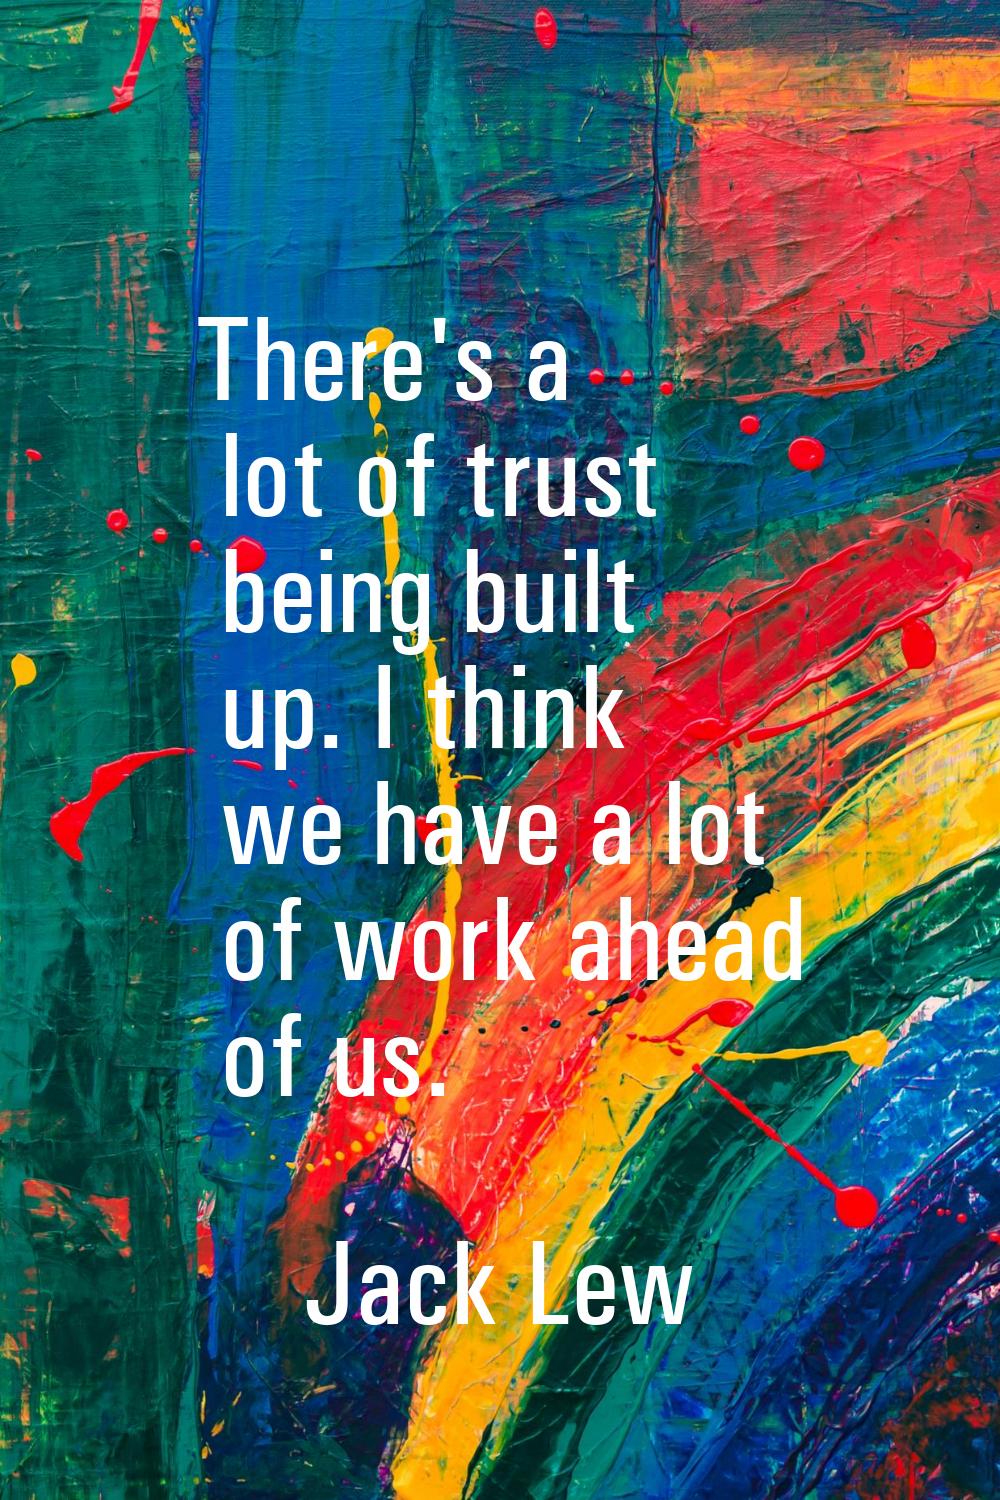 There's a lot of trust being built up. I think we have a lot of work ahead of us.